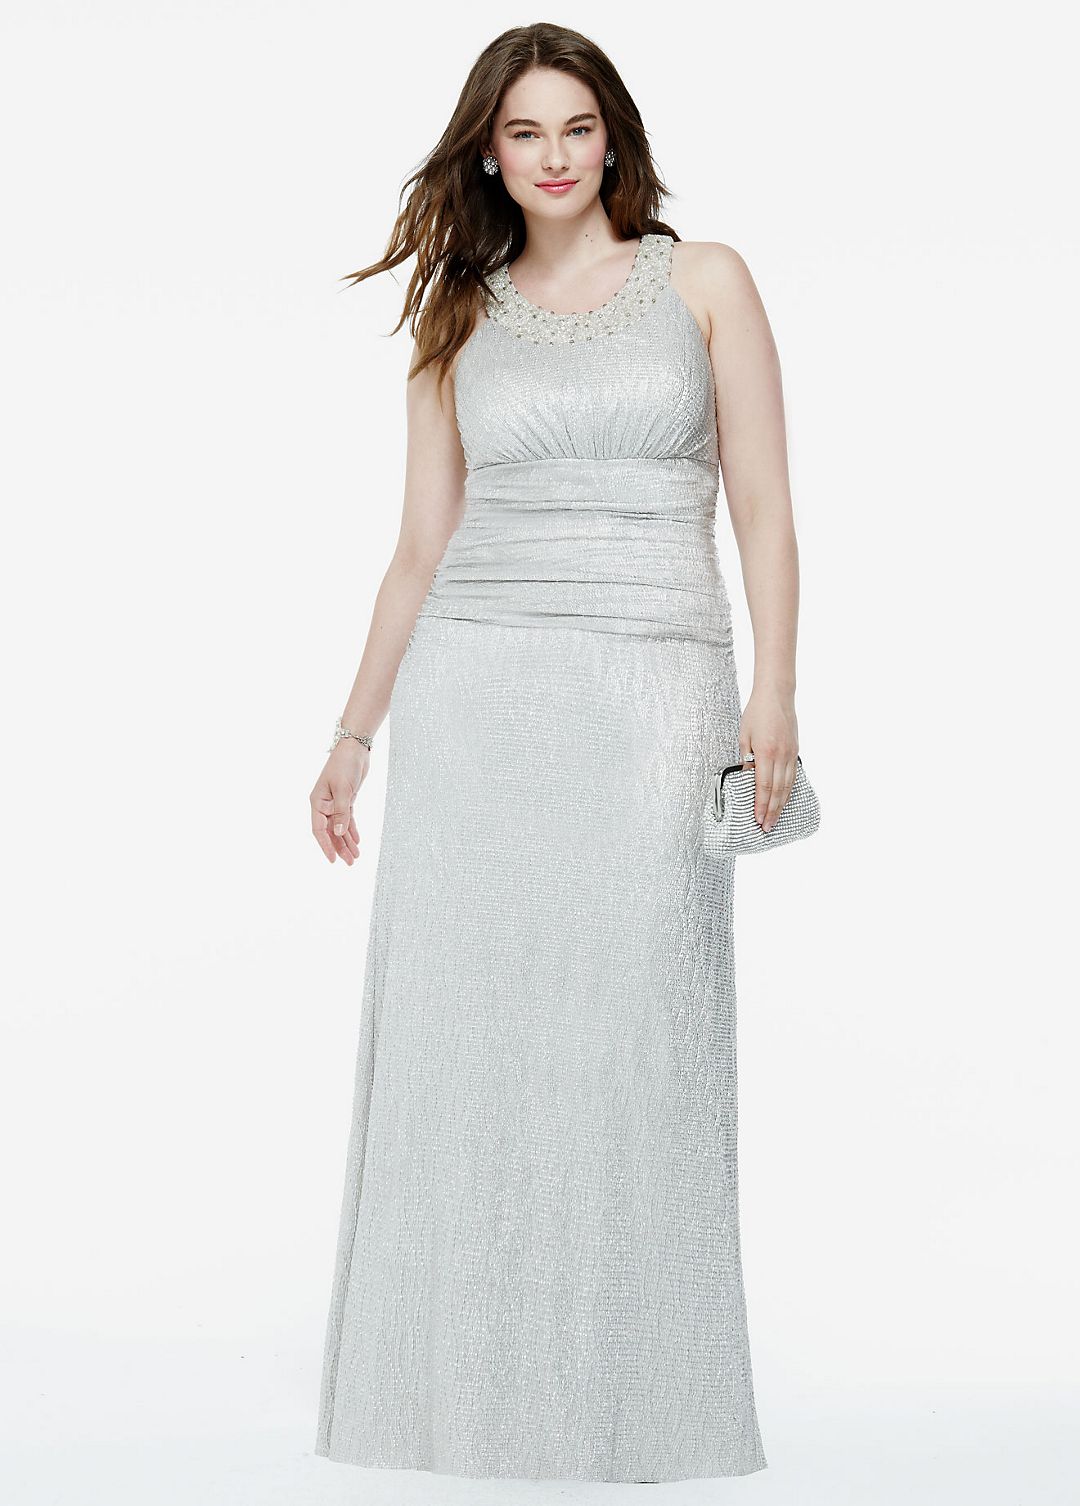 Long Sleeveless Ruched Foil Jersey Dress Image 4